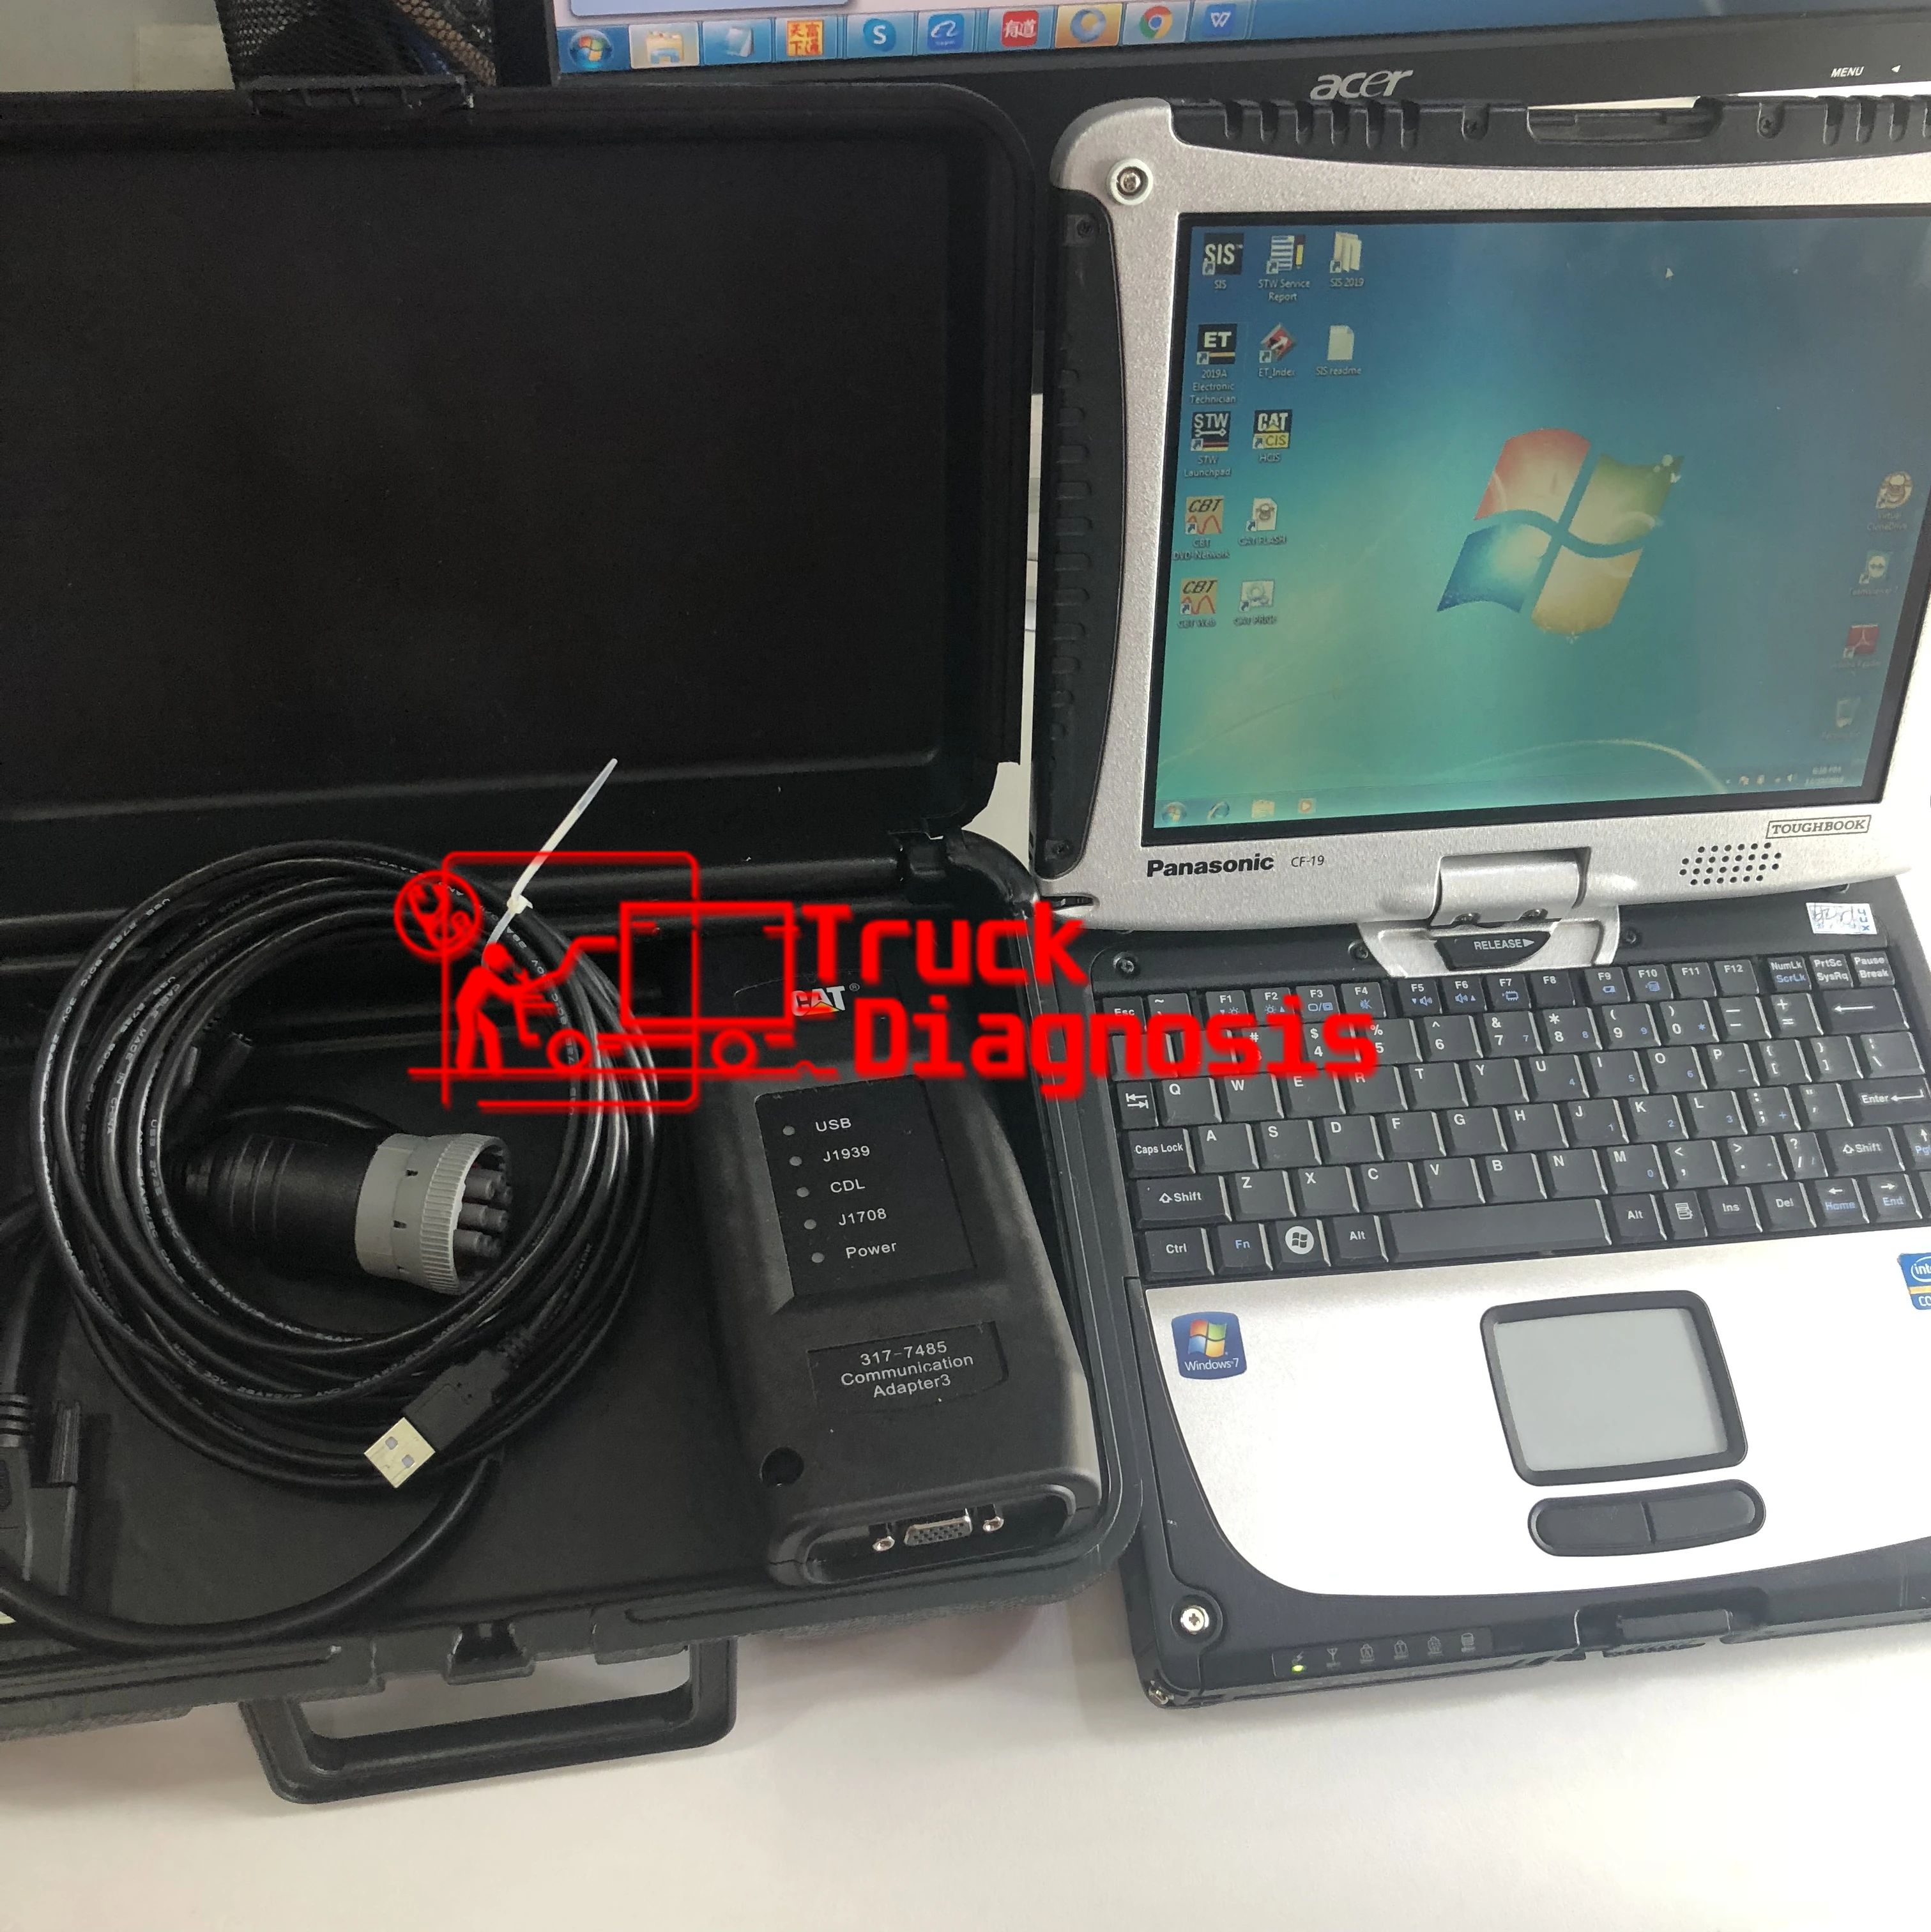 

ET Communication Adapter III comm 3 diagnostic tool with ET diagnostic interface+sis software+Flash software+CF52 laptop